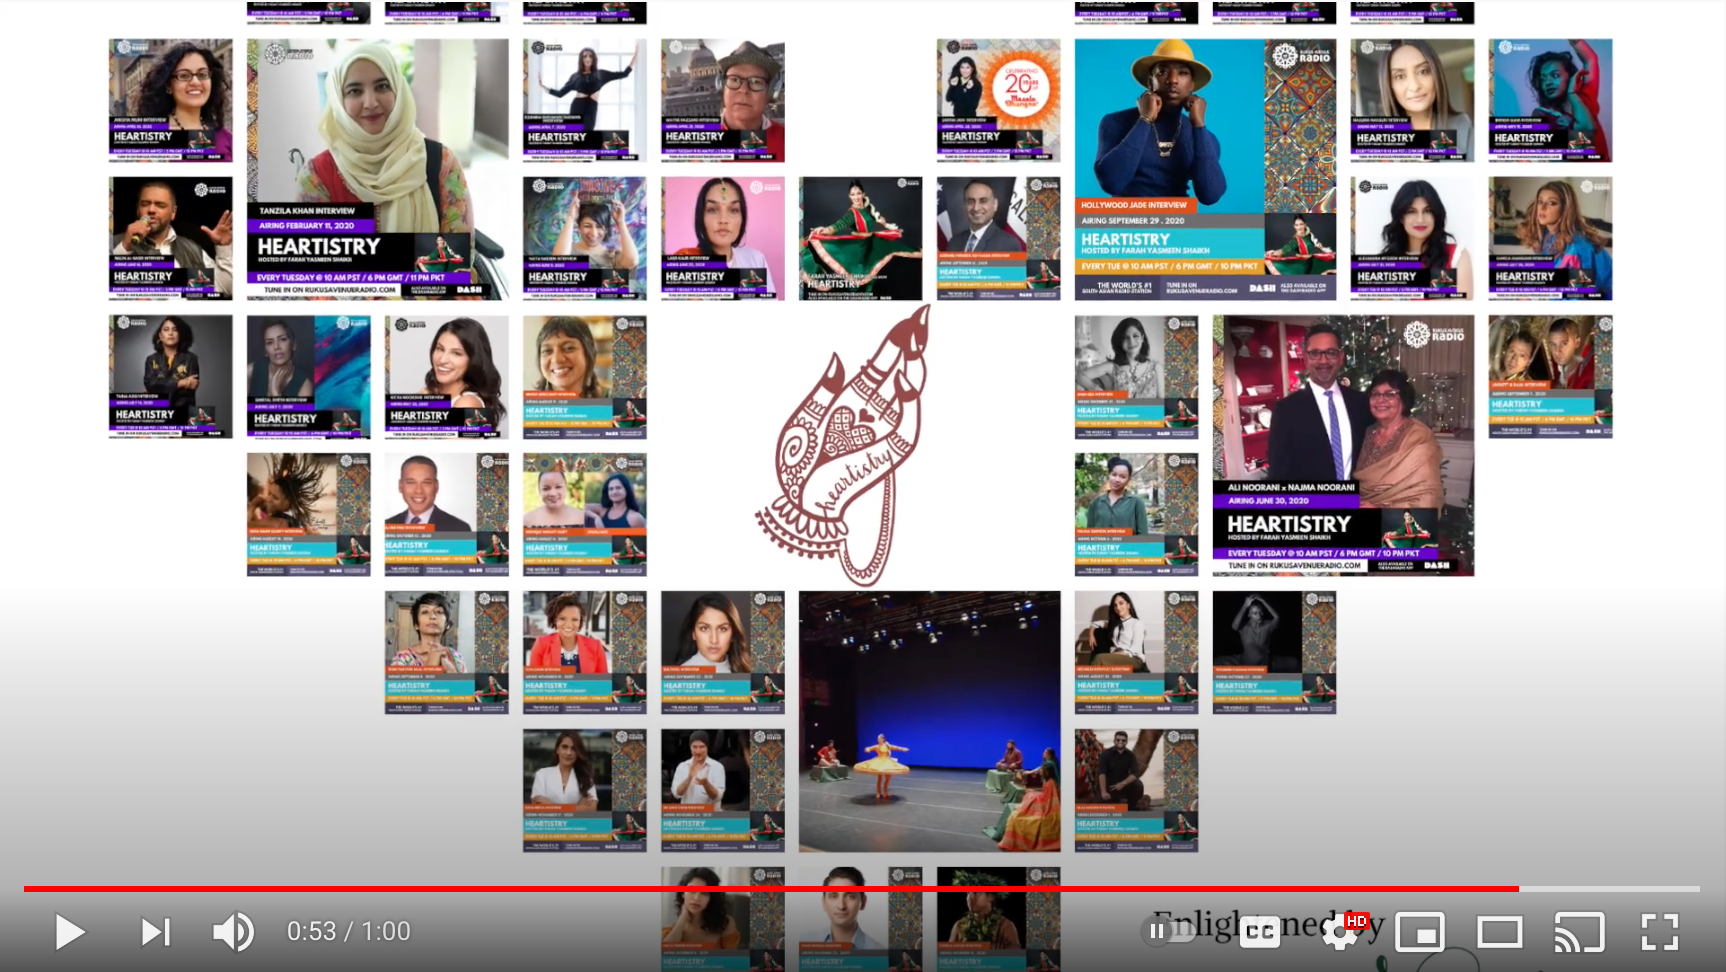 Screenshot from Heartistry's 2020 Year in Review video